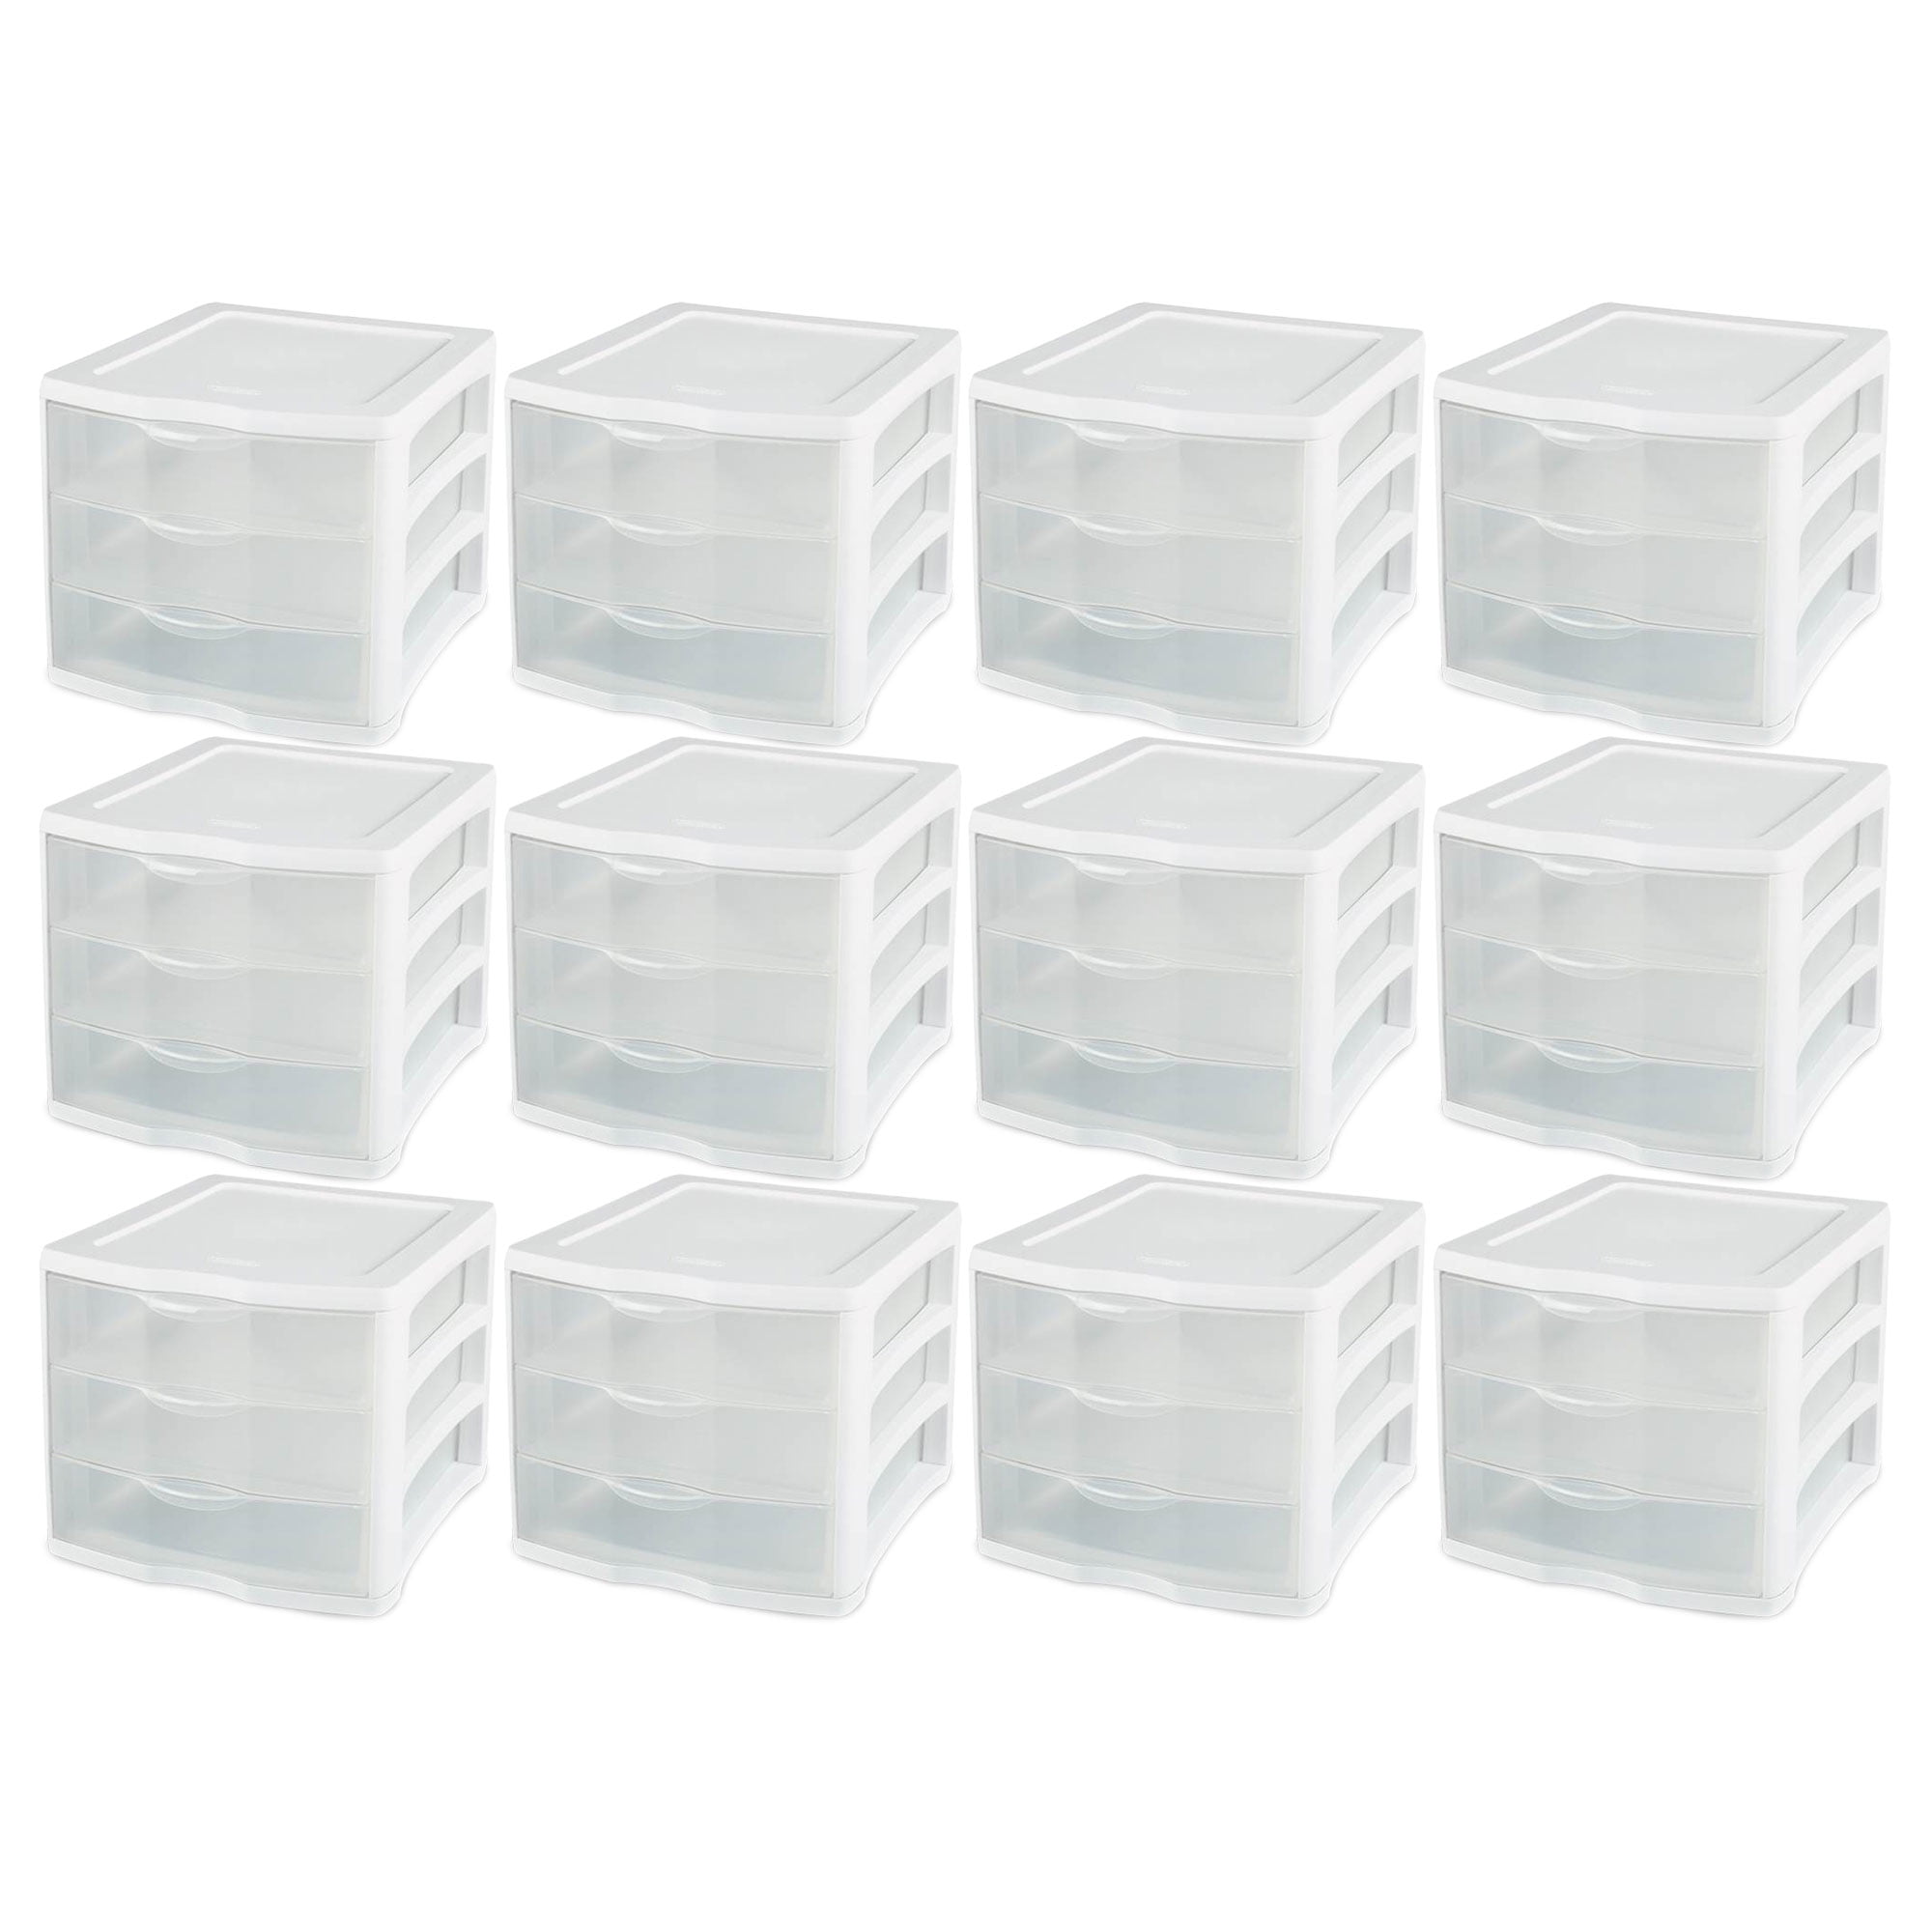 Sterilite ClearView Stacking 3 Drawer Storage Organizer System, (12 Pack) 